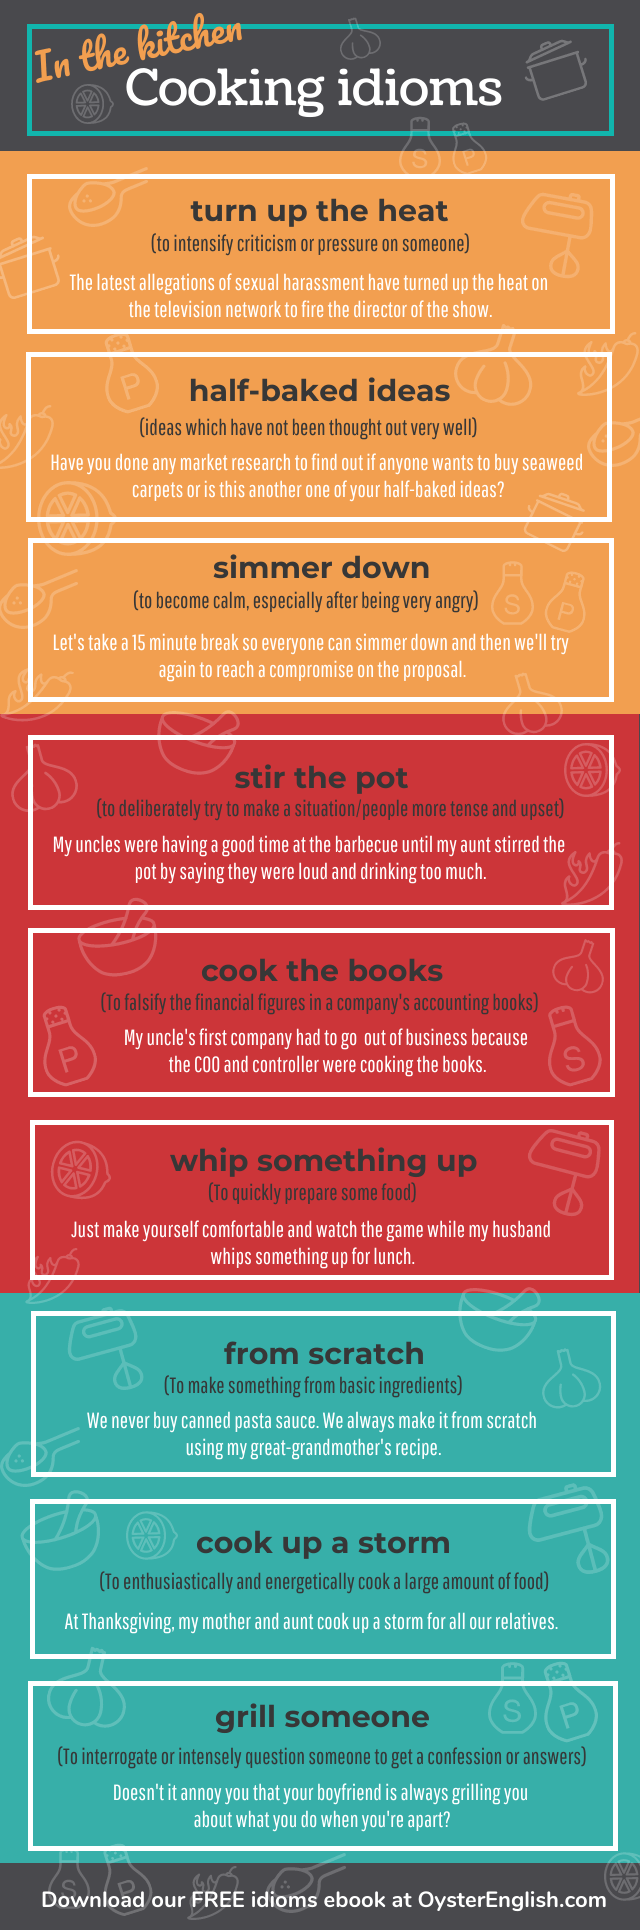 Learn Popular Cooking Idioms